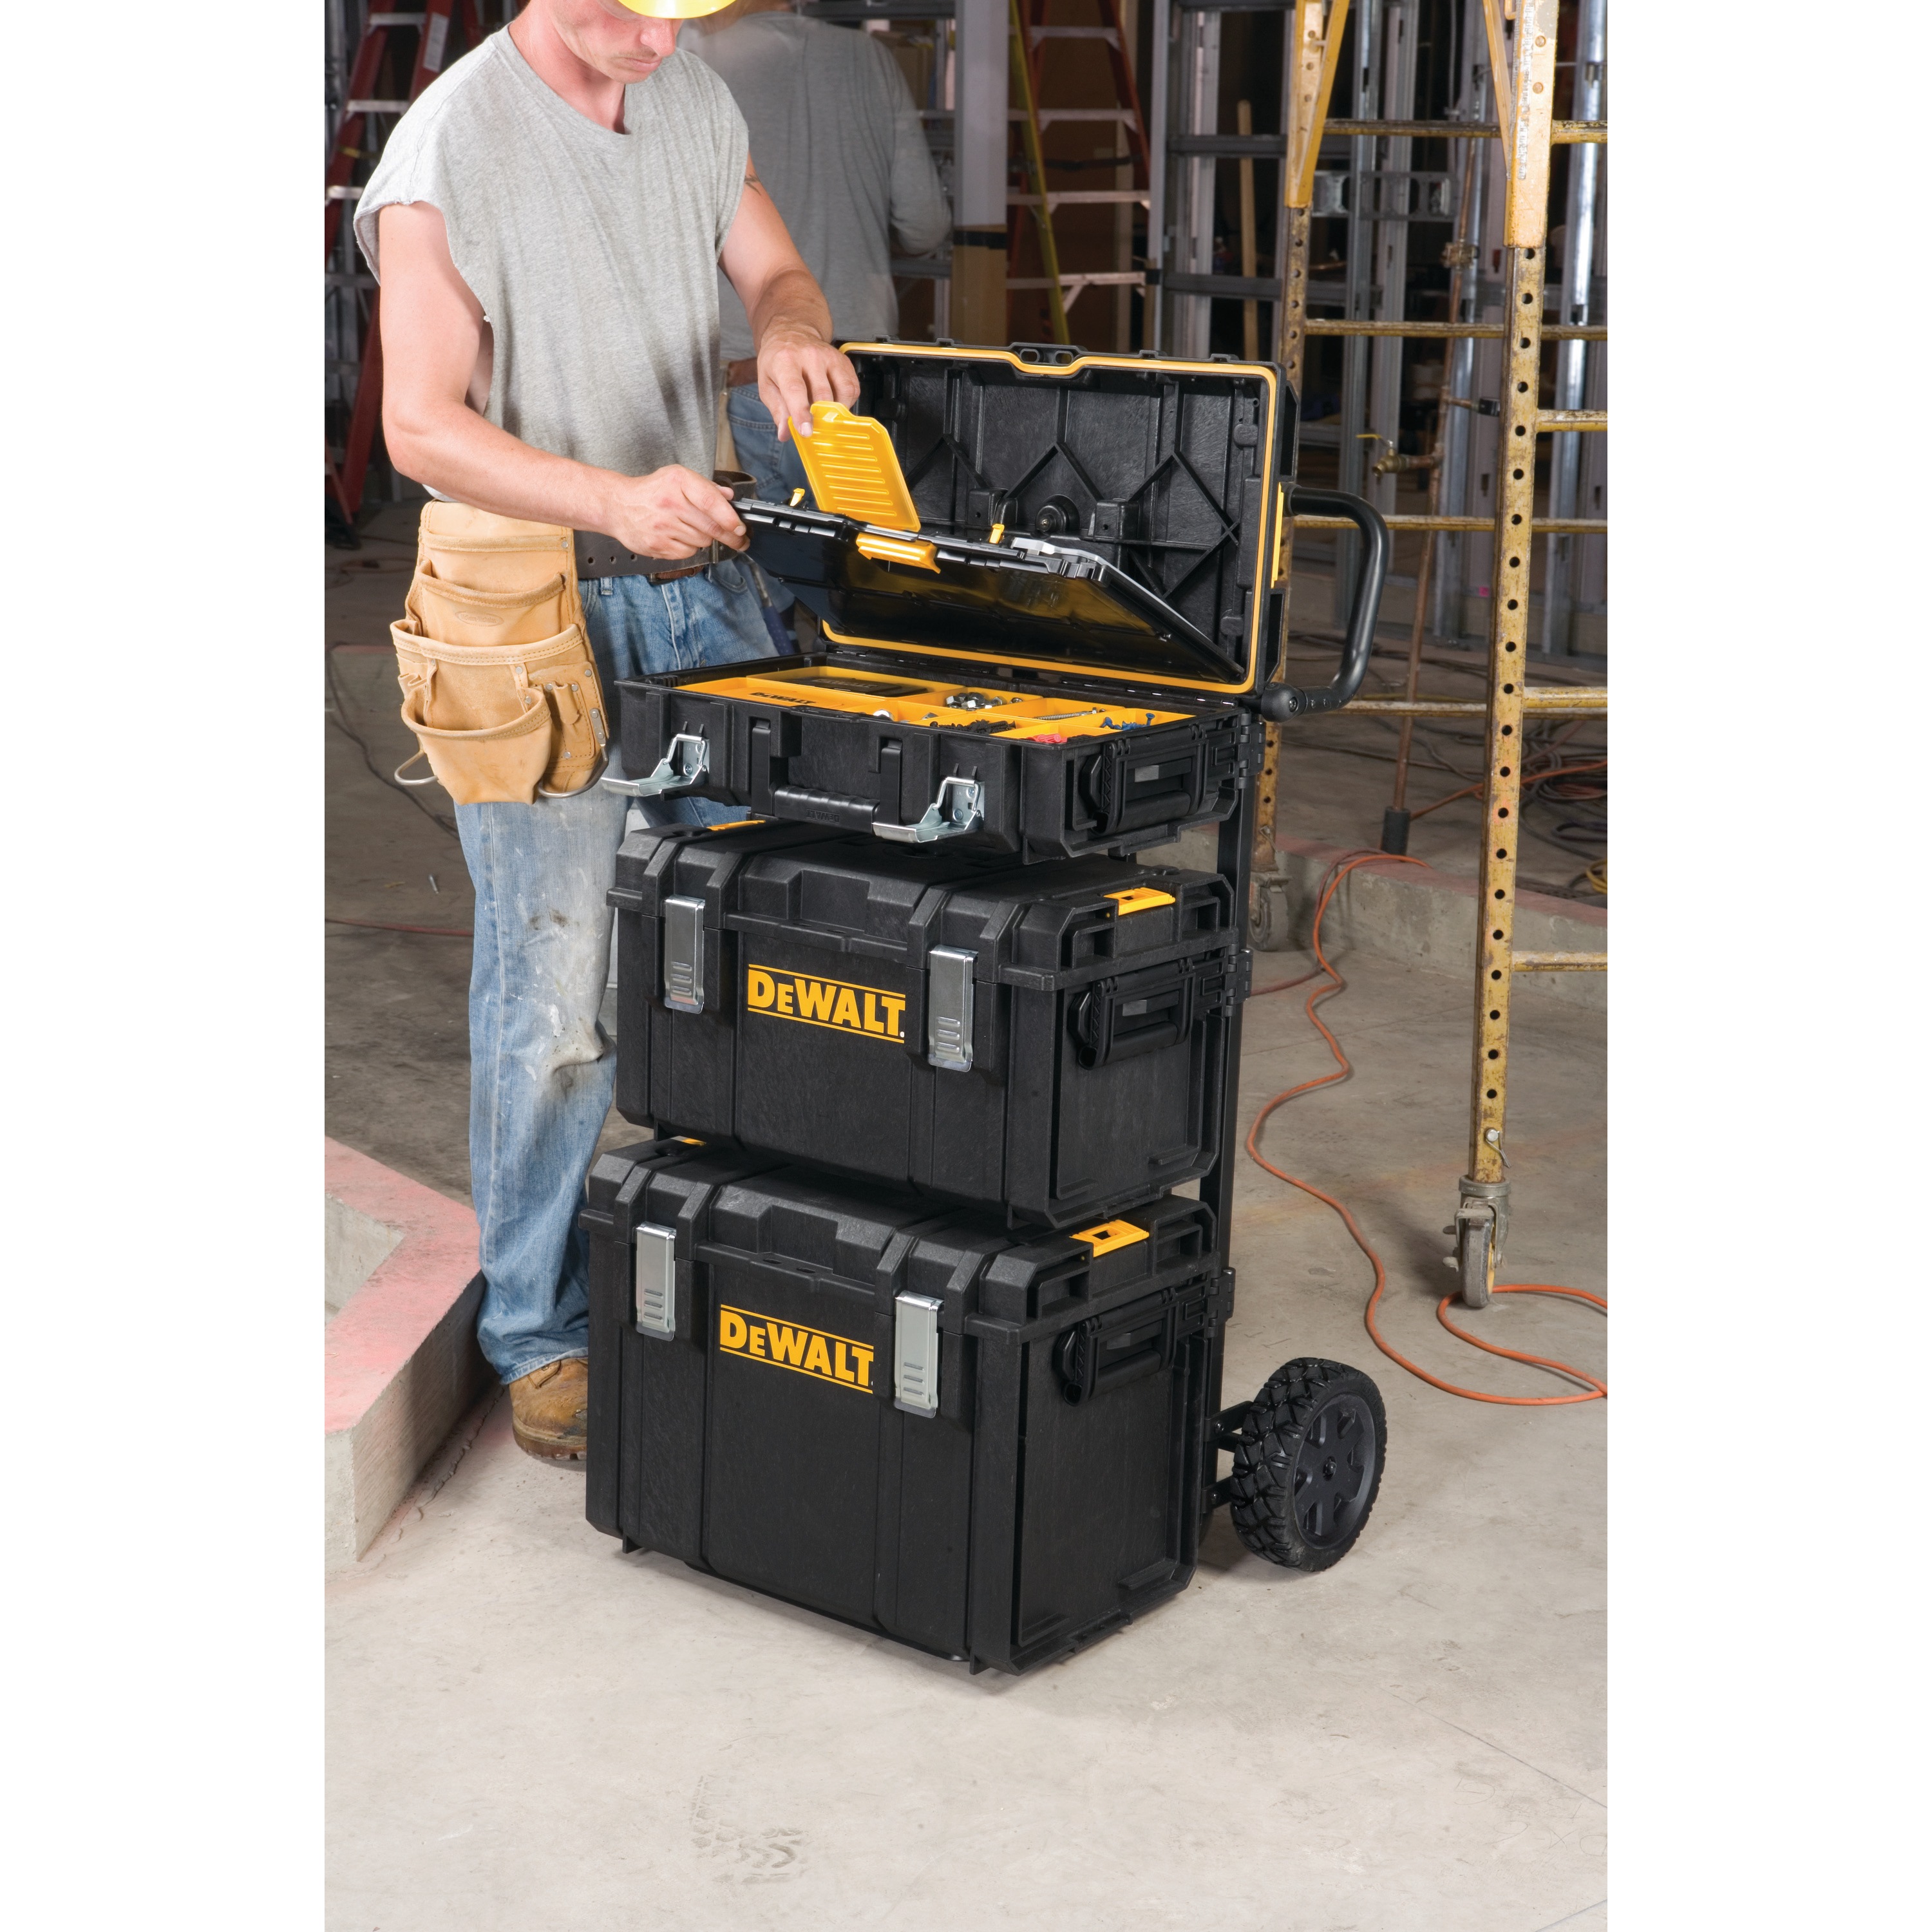 tough system DS carrier with three cases attached to it in use at a worksite.